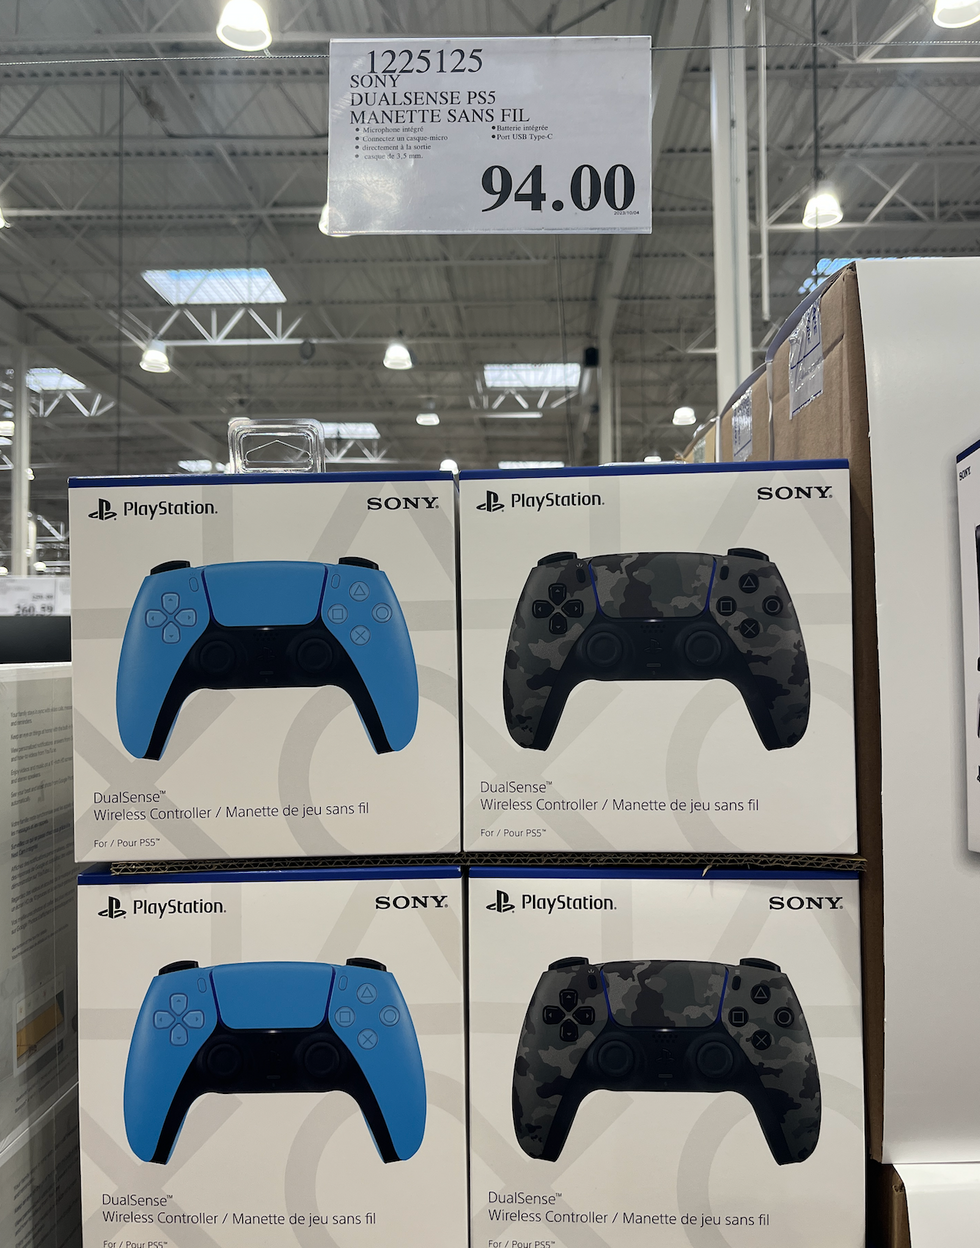 PlayStation controllers at Costco.